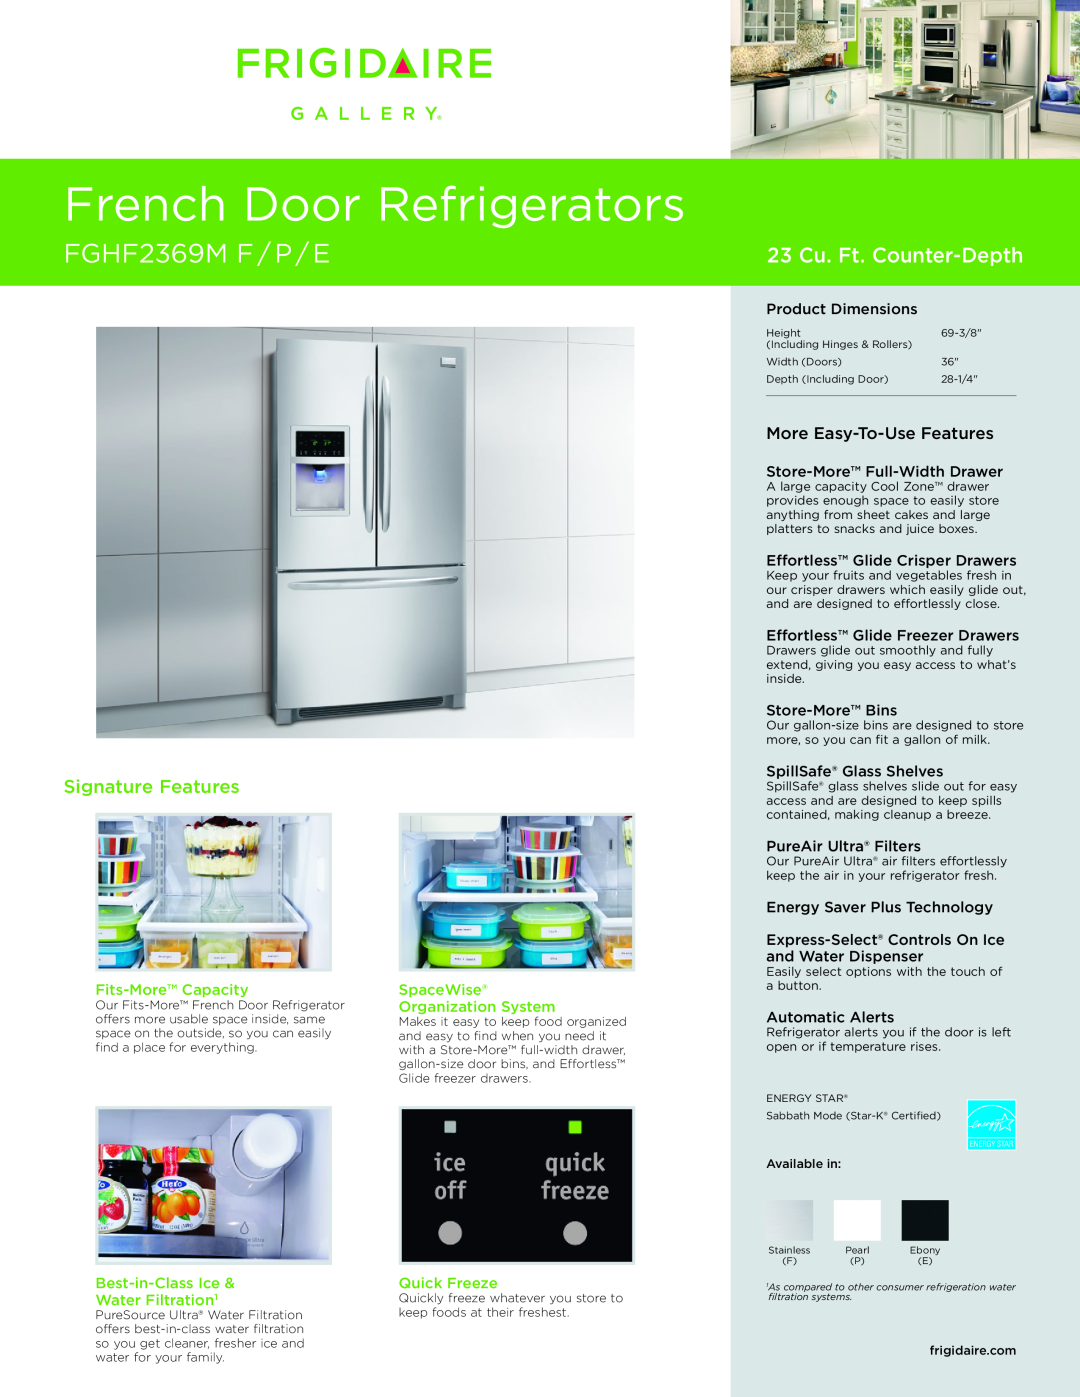 Frigidaire FGHF2369M dimensions Fits-MoreCapacity, SpaceWise, Organization System, Best-in-ClassIce, Quick Freeze 